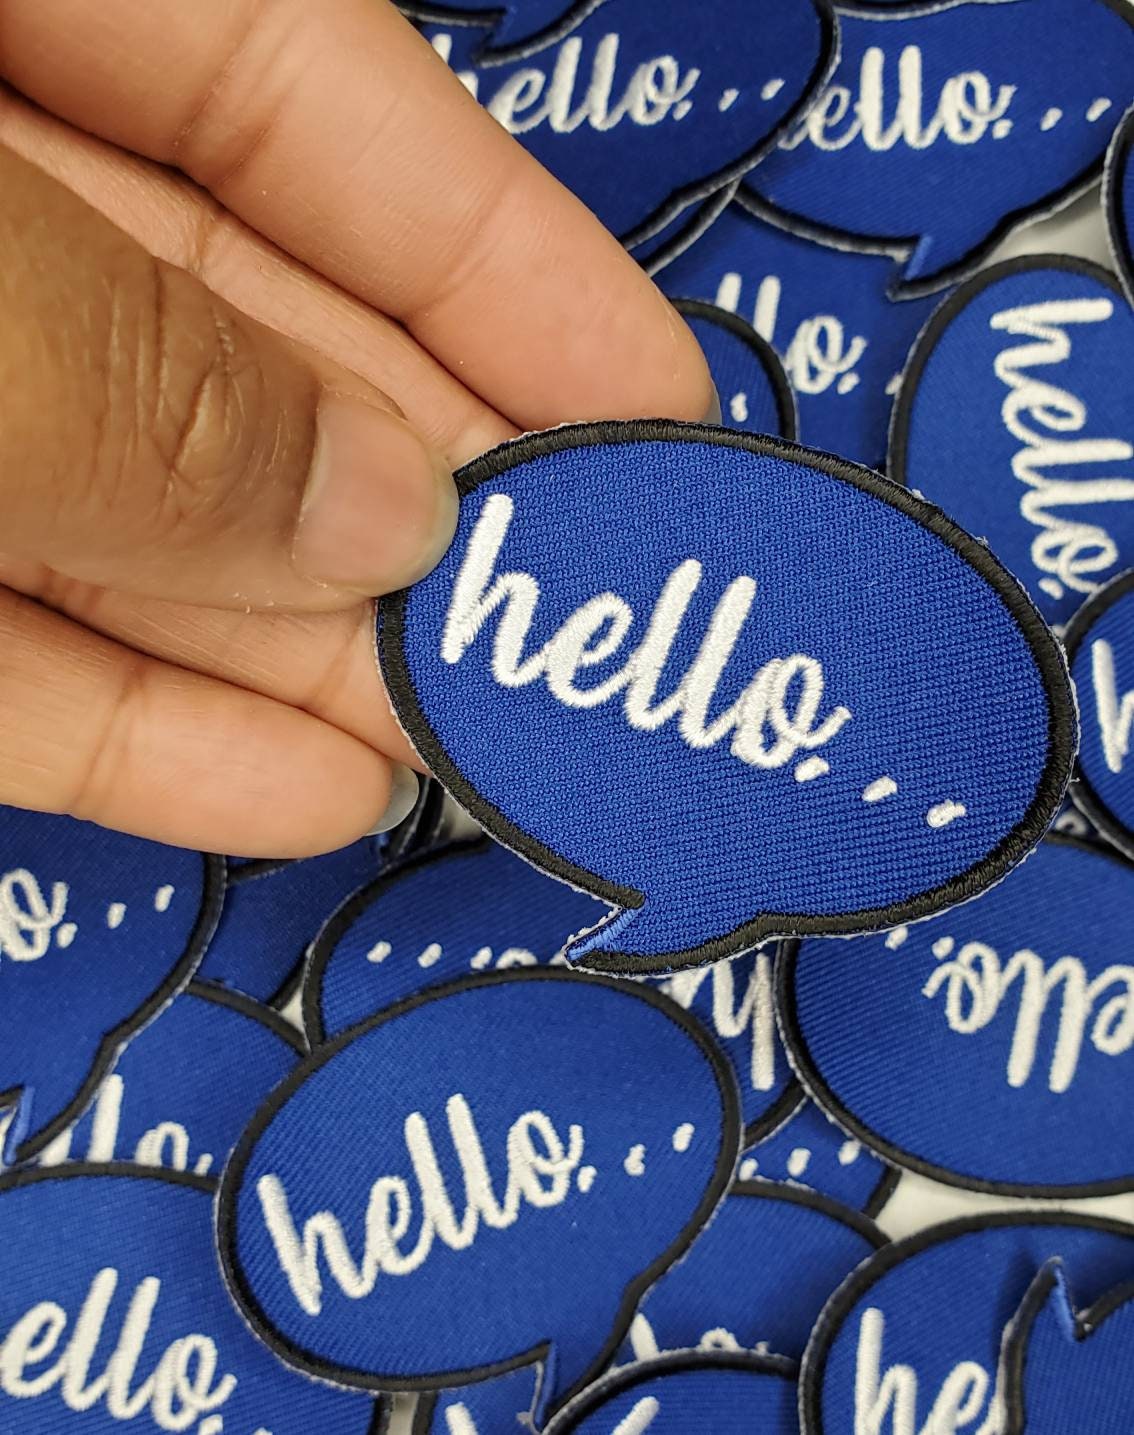 New Arrival, 2-pc set, "Hello" Talk Bubble, 2x1 inch,  Cool Appliques For Clothing, Iron-on Embroidered Patch; Denim and Accessories Patch